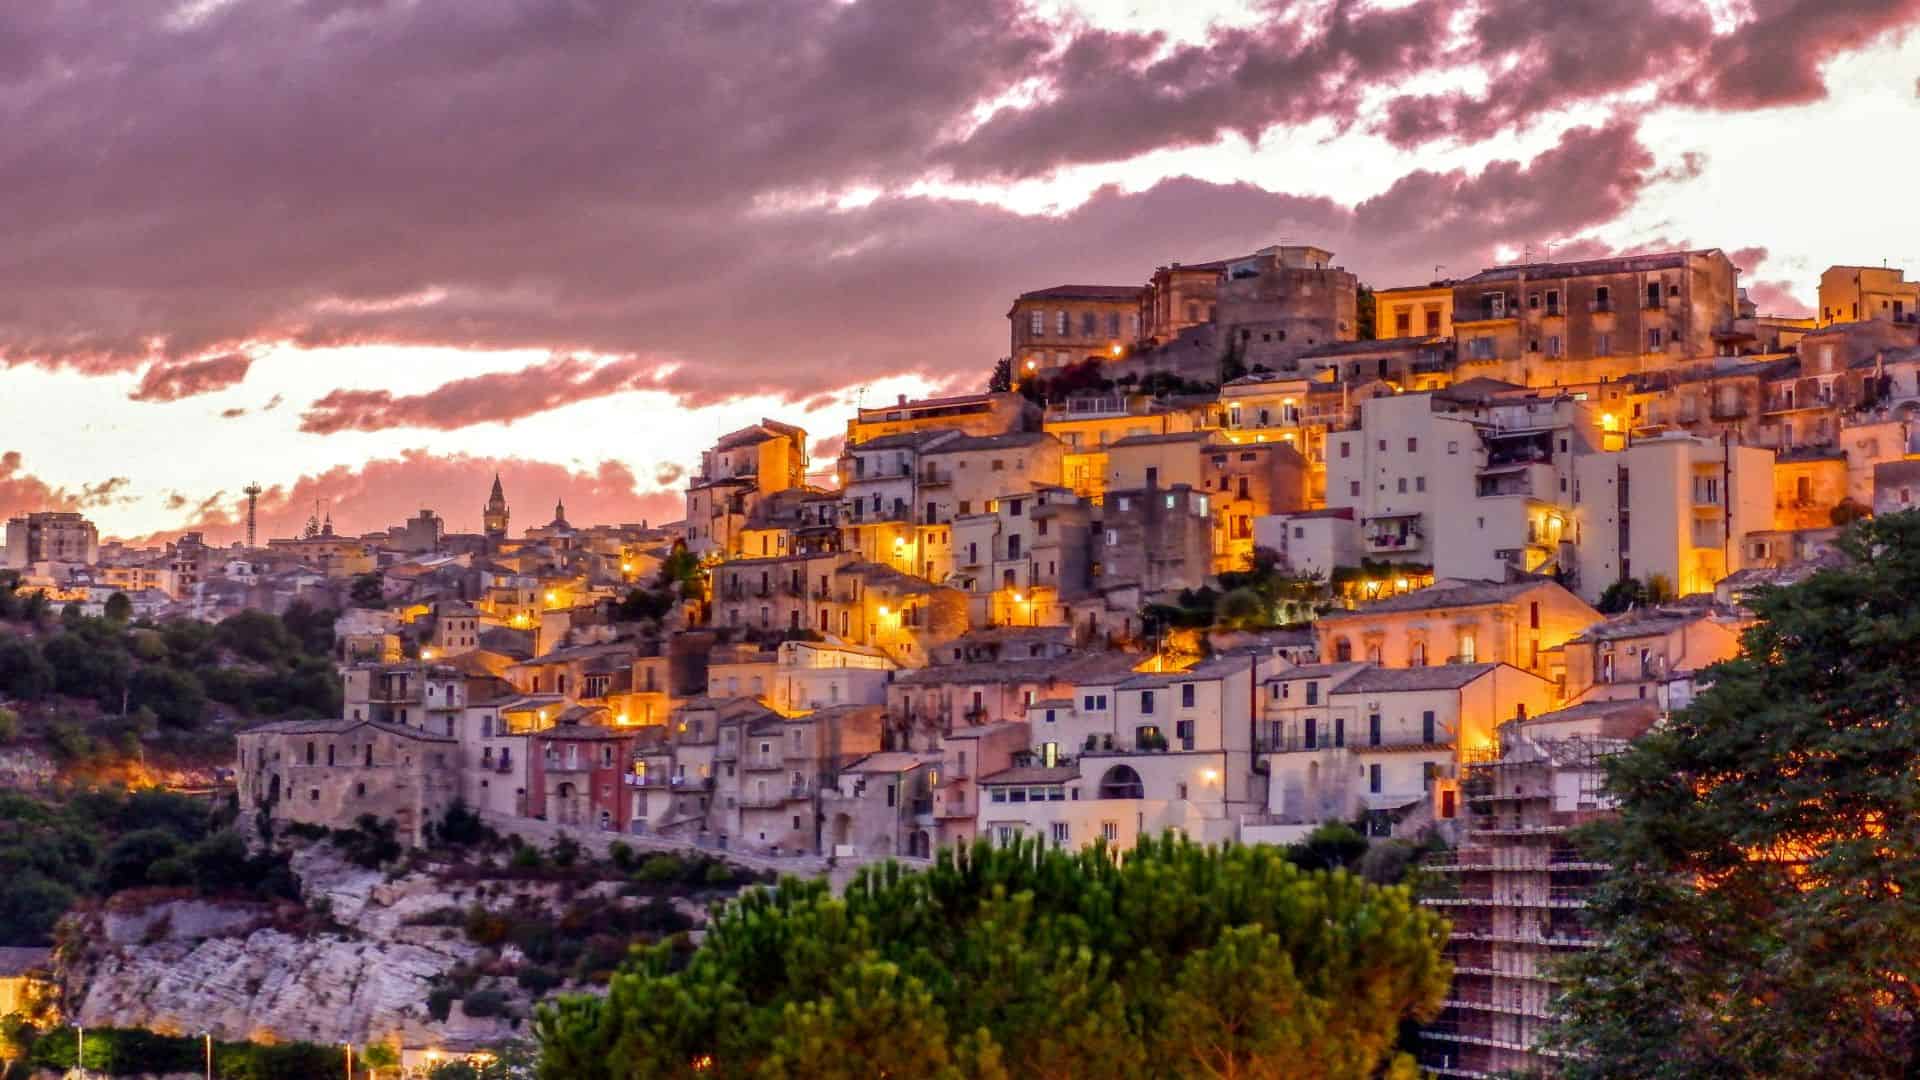 View of the city of Ragusa